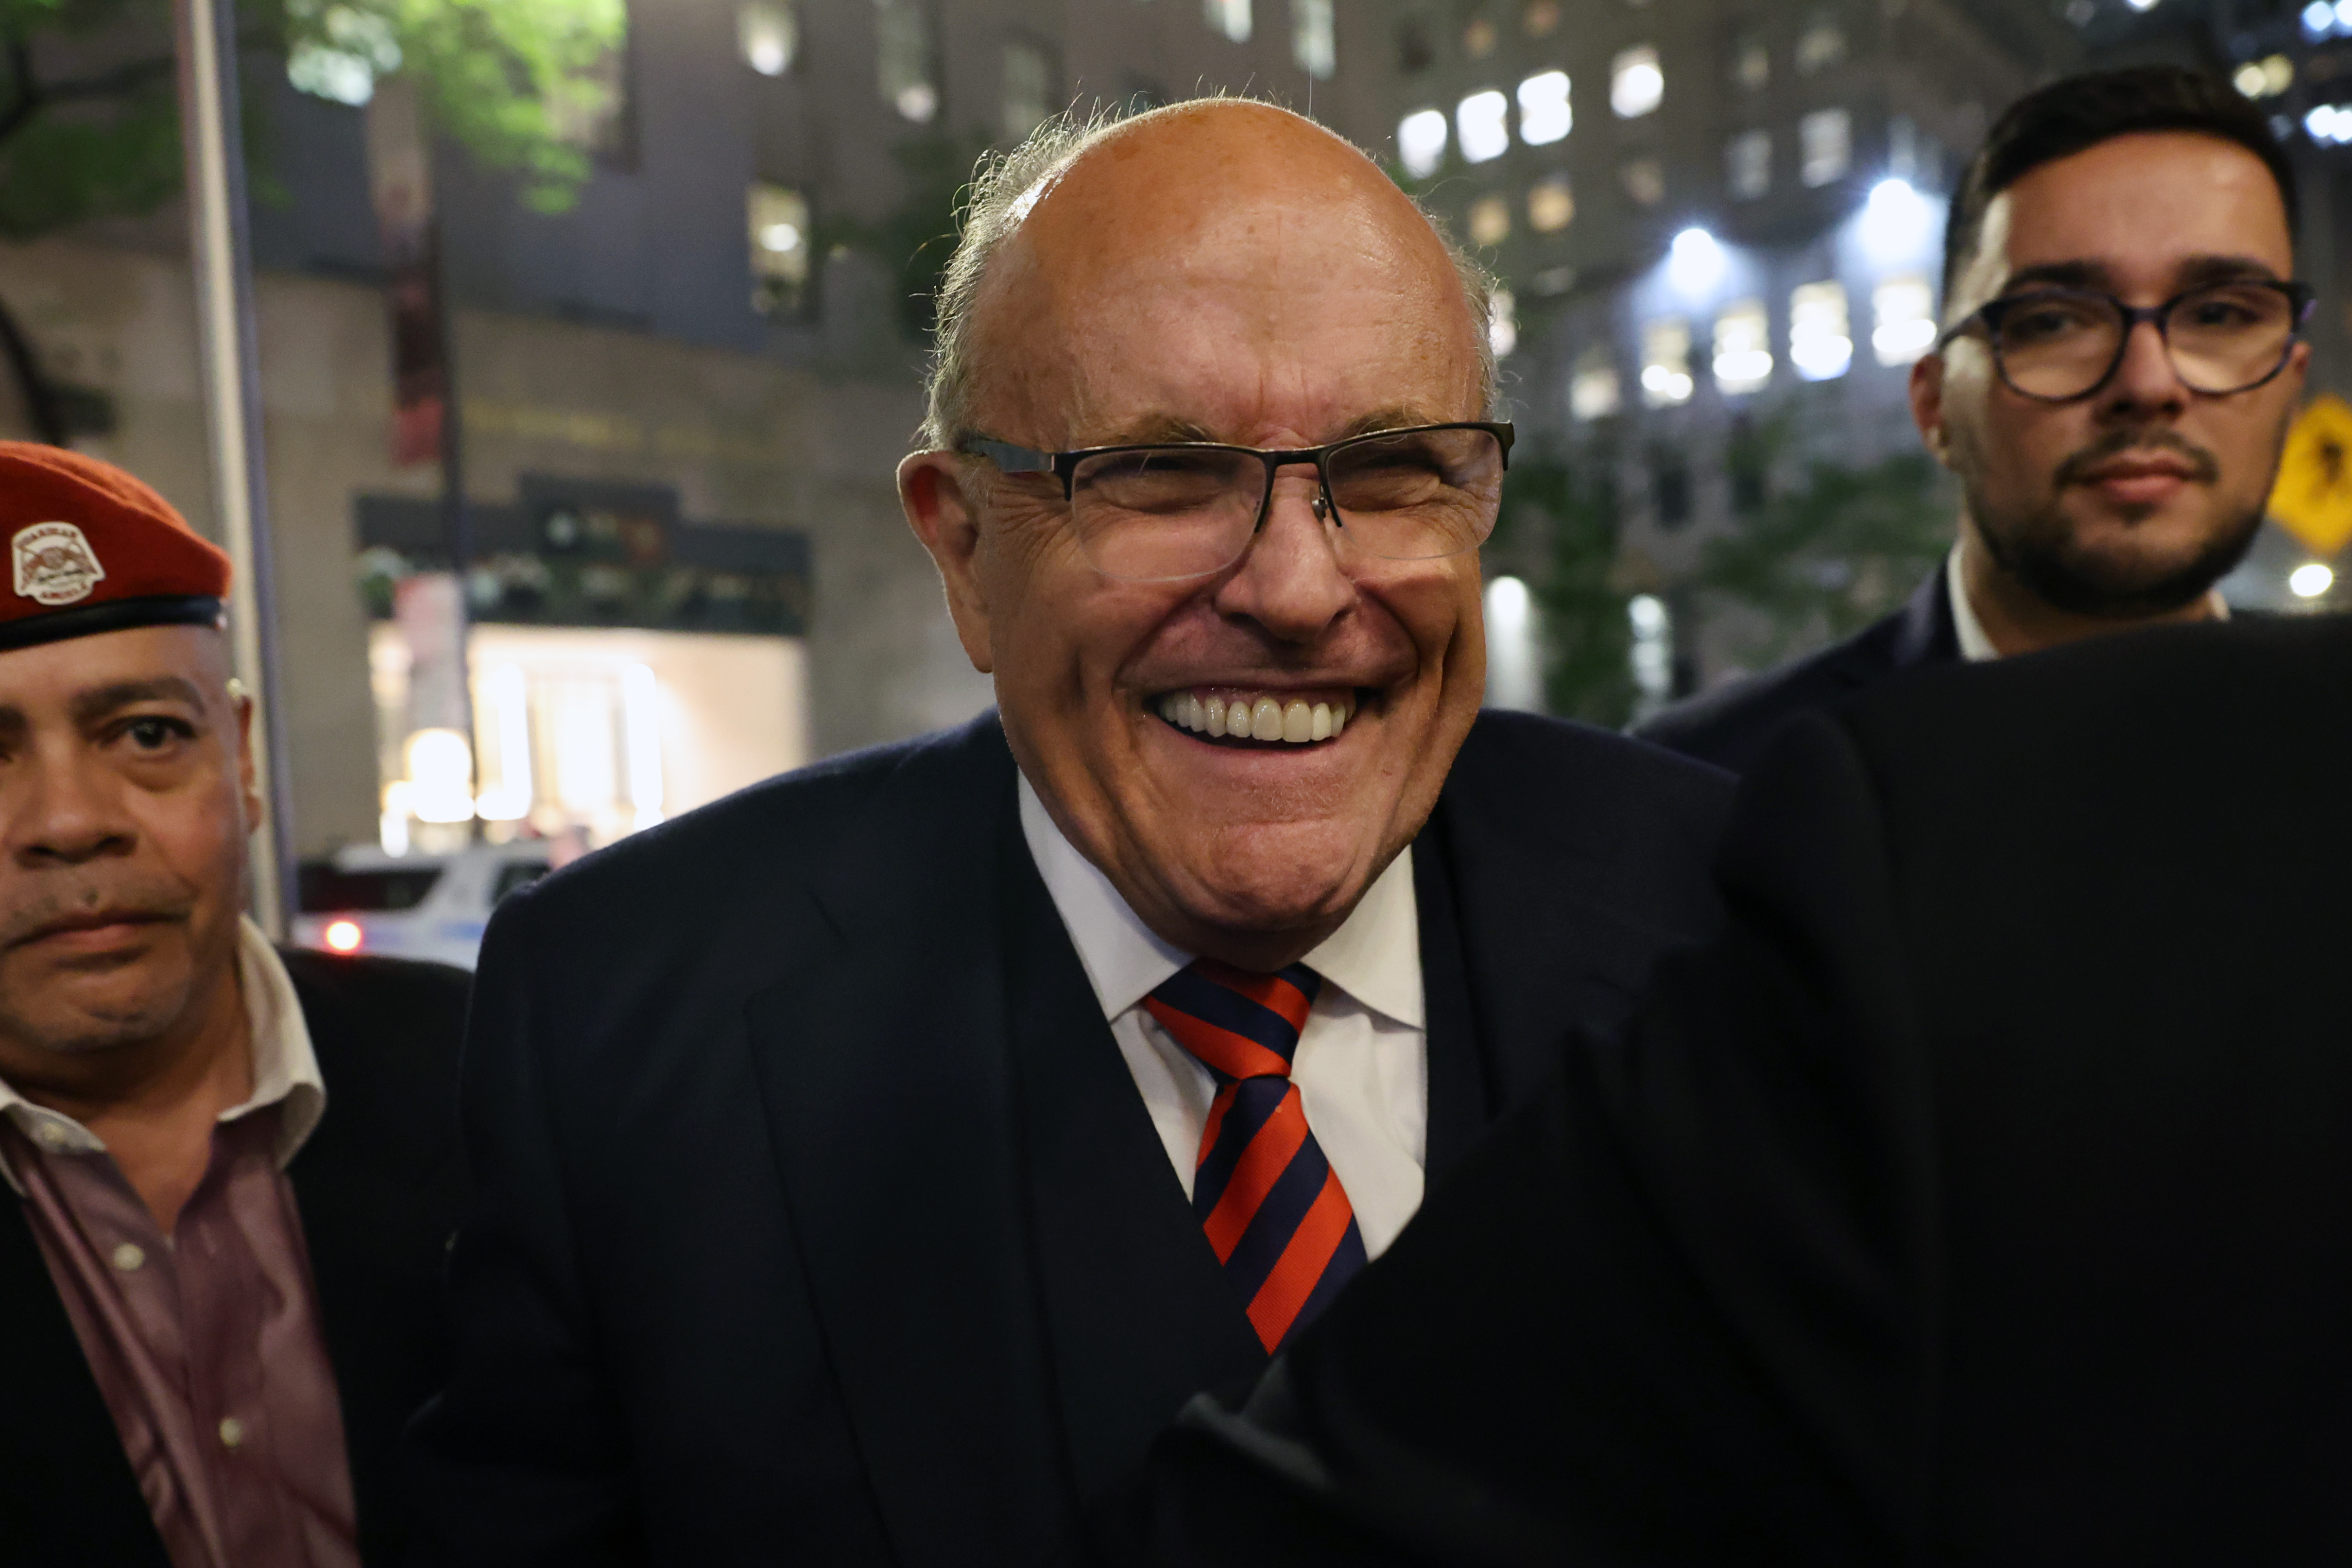 Rudy Giuliani Will Not Face Charges in Ukraine Lobbying Probe After FBI Raid: Prosecutors